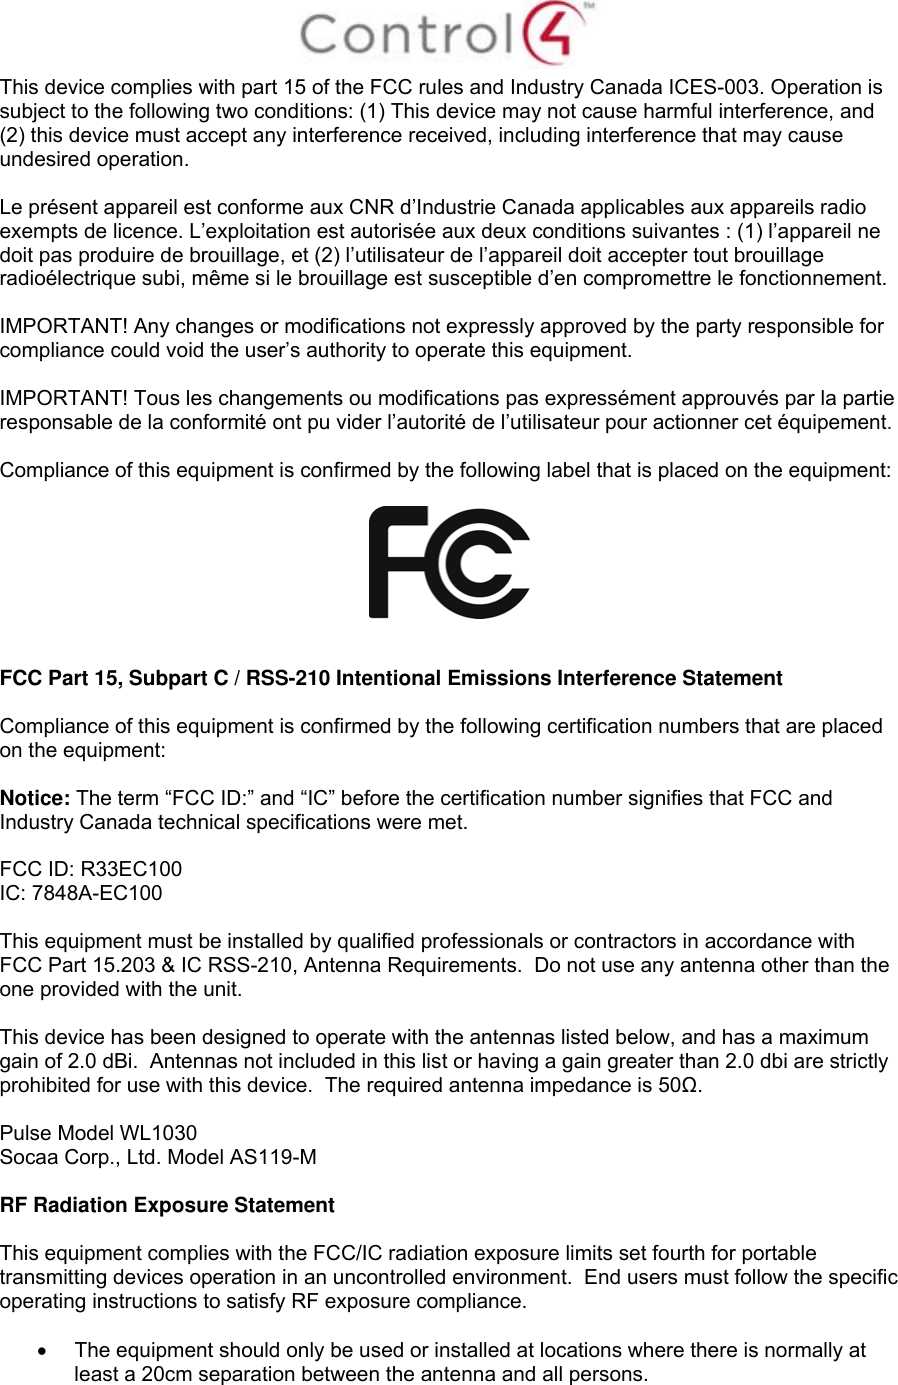  This device complies with part 15 of the FCC rules and Industry Canada ICES-003. Operation is subject to the following two conditions: (1) This device may not cause harmful interference, and (2) this device must accept any interference received, including interference that may cause undesired operation.  Le présent appareil est conforme aux CNR d’Industrie Canada applicables aux appareils radio exempts de licence. L’exploitation est autorisée aux deux conditions suivantes : (1) l’appareil ne doit pas produire de brouillage, et (2) l’utilisateur de l’appareil doit accepter tout brouillage radioélectrique subi, même si le brouillage est susceptible d’en compromettre le fonctionnement.  IMPORTANT! Any changes or modifications not expressly approved by the party responsible for compliance could void the user’s authority to operate this equipment.  IMPORTANT! Tous les changements ou modifications pas expressément approuvés par la partie responsable de la conformité ont pu vider l’autorité de l’utilisateur pour actionner cet équipement.  Compliance of this equipment is confirmed by the following label that is placed on the equipment:     FCC Part 15, Subpart C / RSS-210 Intentional Emissions Interference Statement  Compliance of this equipment is confirmed by the following certification numbers that are placed on the equipment:  Notice: The term “FCC ID:” and “IC” before the certification number signifies that FCC and Industry Canada technical specifications were met.  FCC ID: R33EC100 IC: 7848A-EC100   This equipment must be installed by qualified professionals or contractors in accordance with FCC Part 15.203 &amp; IC RSS-210, Antenna Requirements.  Do not use any antenna other than the one provided with the unit.  This device has been designed to operate with the antennas listed below, and has a maximum gain of 2.0 dBi.  Antennas not included in this list or having a gain greater than 2.0 dbi are strictly prohibited for use with this device.  The required antenna impedance is 50Ω.  Pulse Model WL1030 Socaa Corp., Ltd. Model AS119-M  RF Radiation Exposure Statement  This equipment complies with the FCC/IC radiation exposure limits set fourth for portable transmitting devices operation in an uncontrolled environment.  End users must follow the specific operating instructions to satisfy RF exposure compliance.    The equipment should only be used or installed at locations where there is normally at least a 20cm separation between the antenna and all persons. 